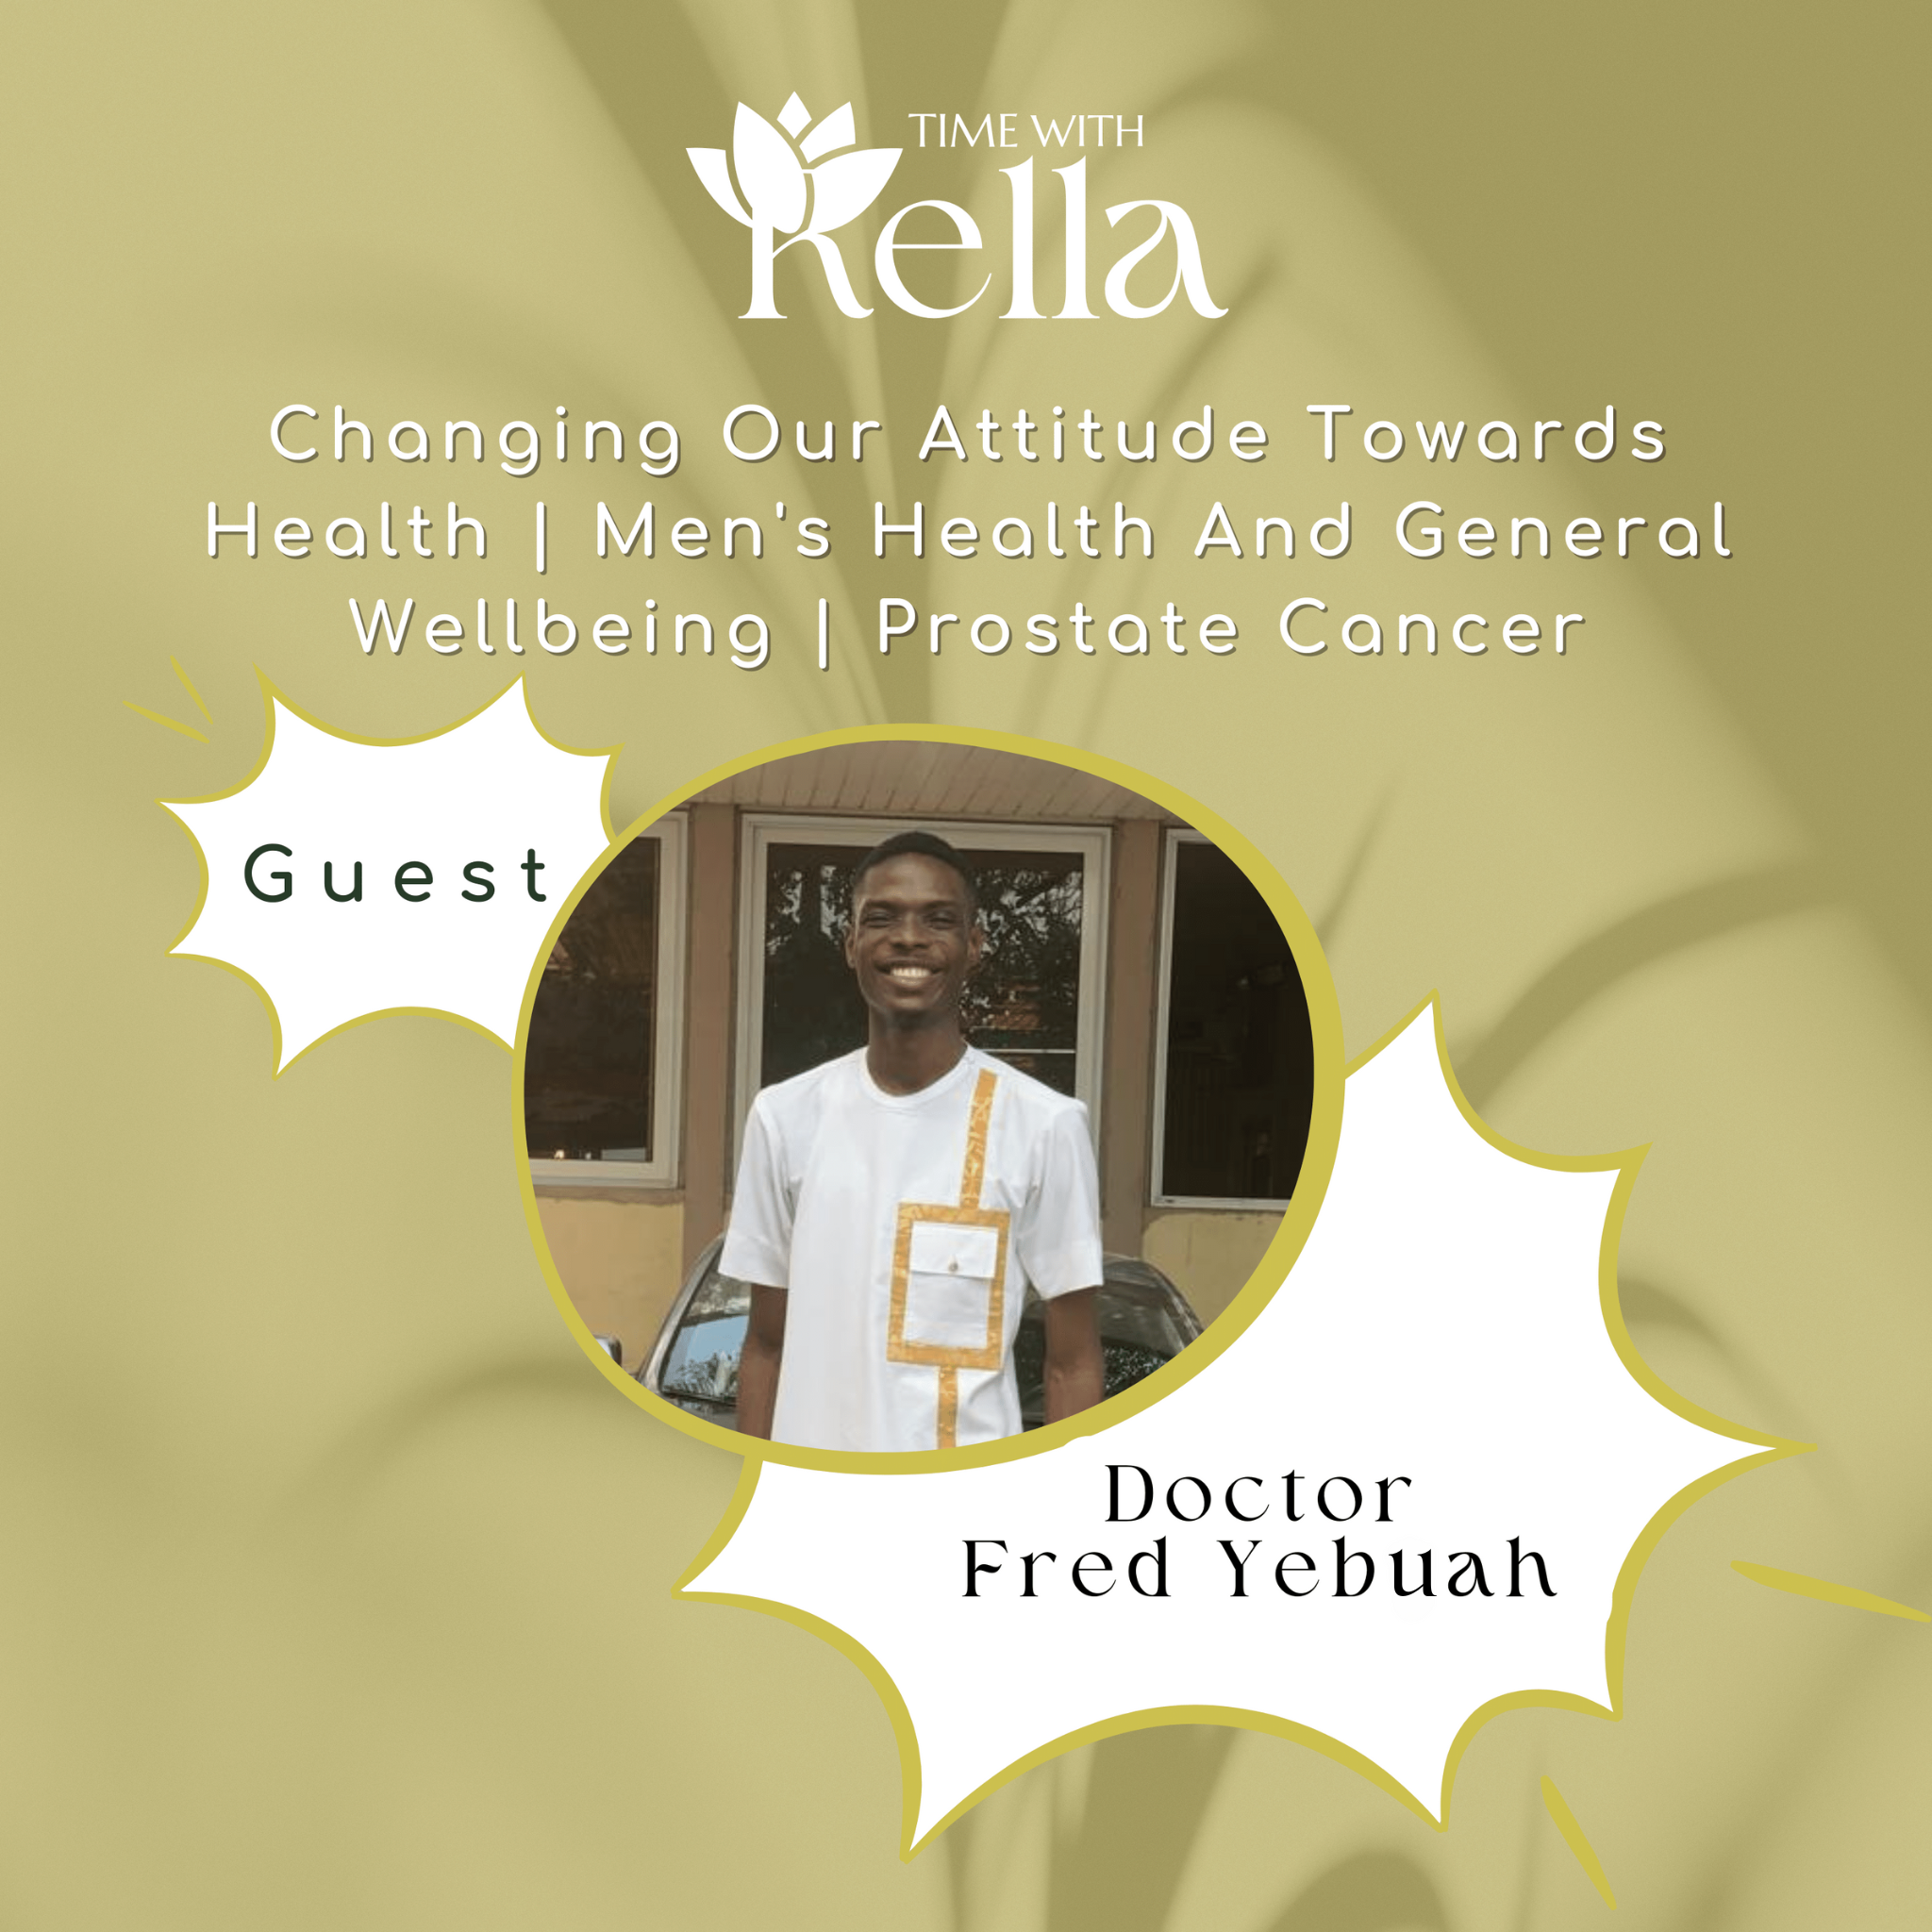 time with rella episode with Dr fred